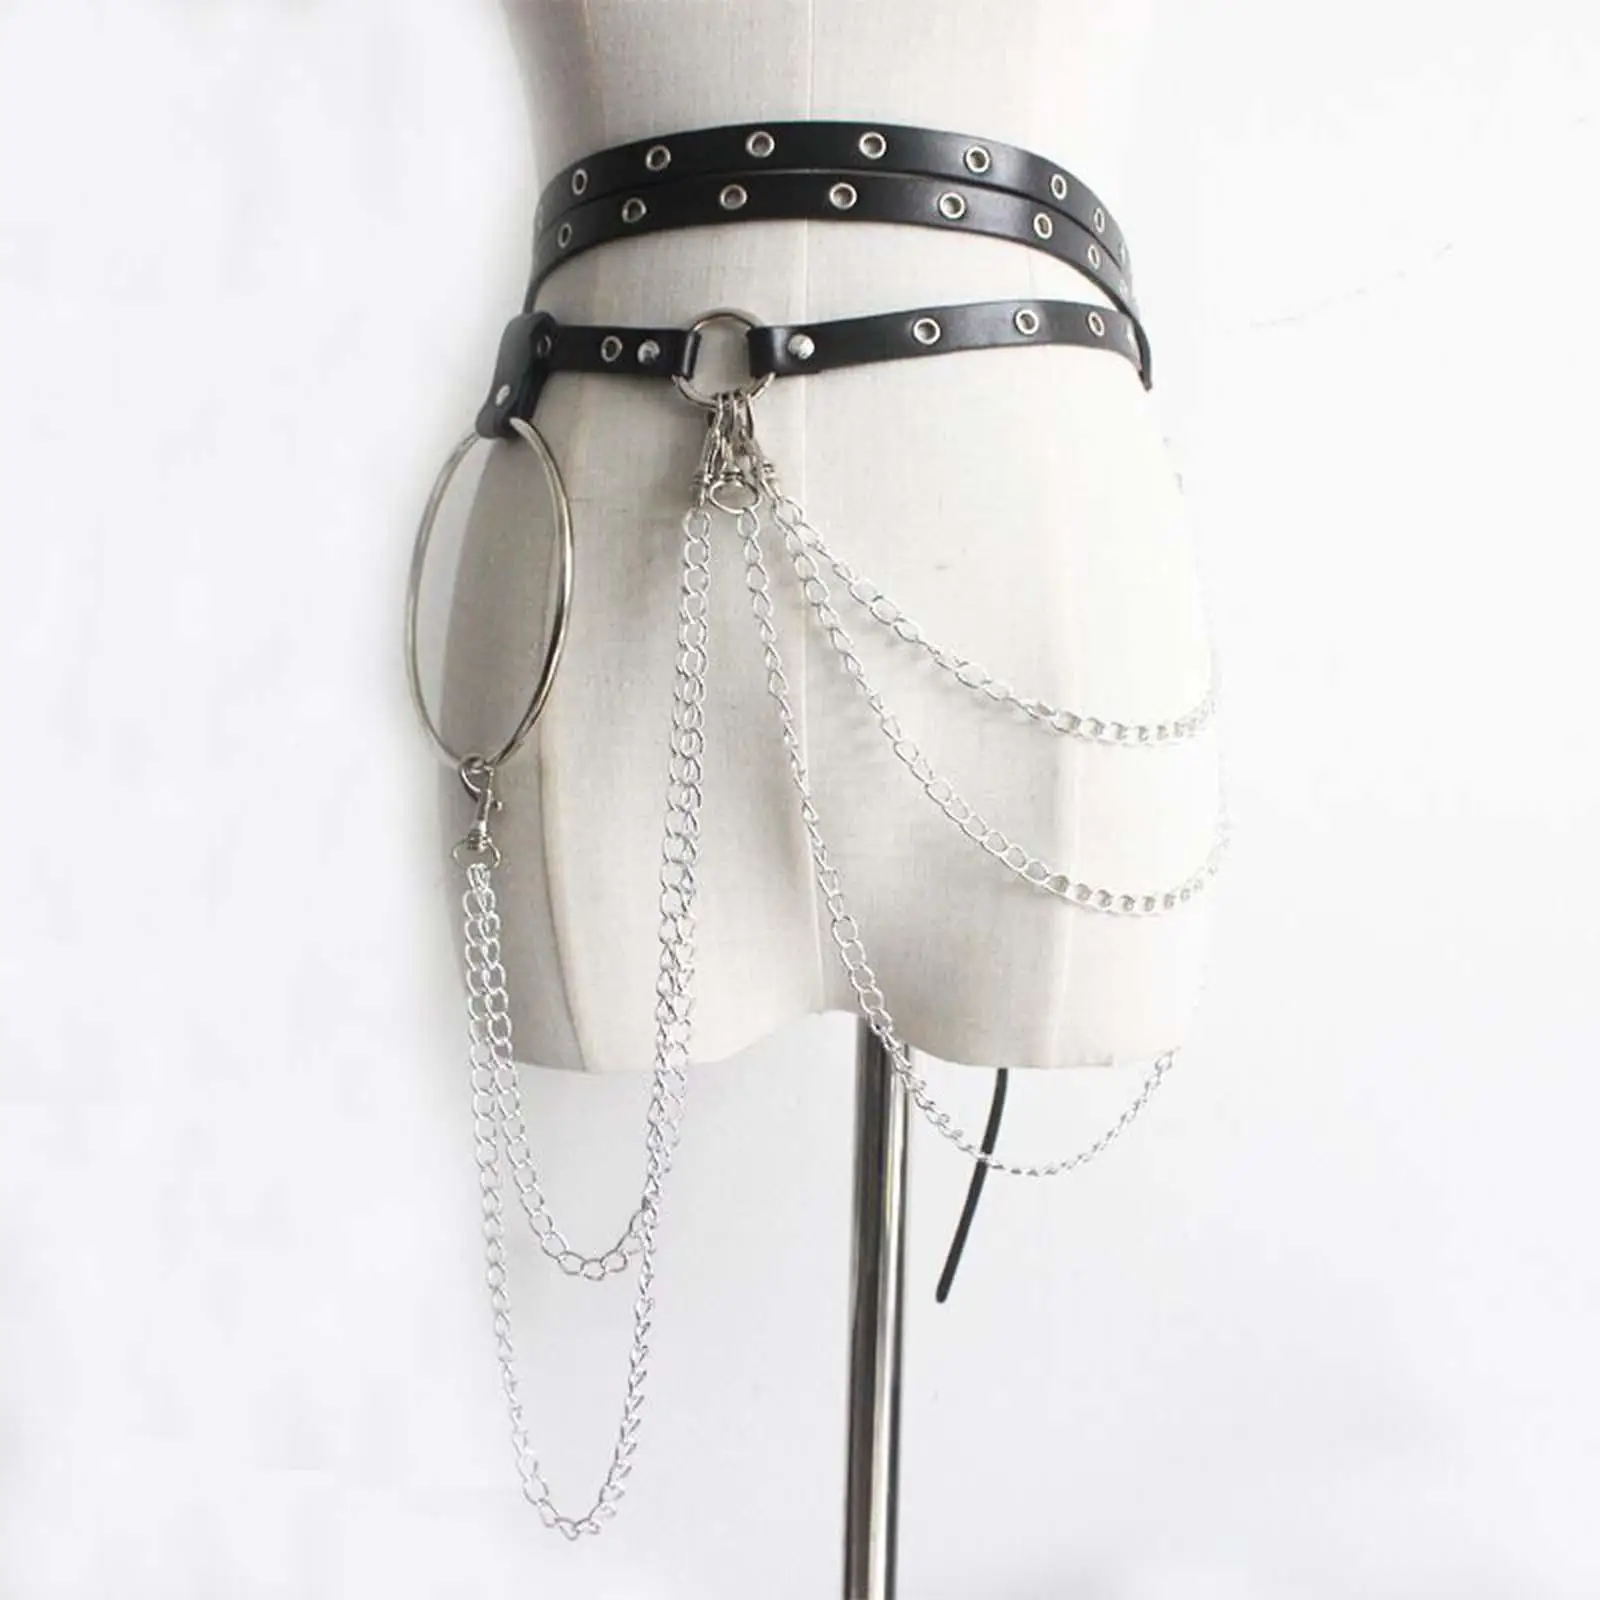 Woman Belly Chains Belt PU Leather Metal Chain Tassel , Highlight Your Daily or Cosplay Outfit Soft Flexible Sturdy Material